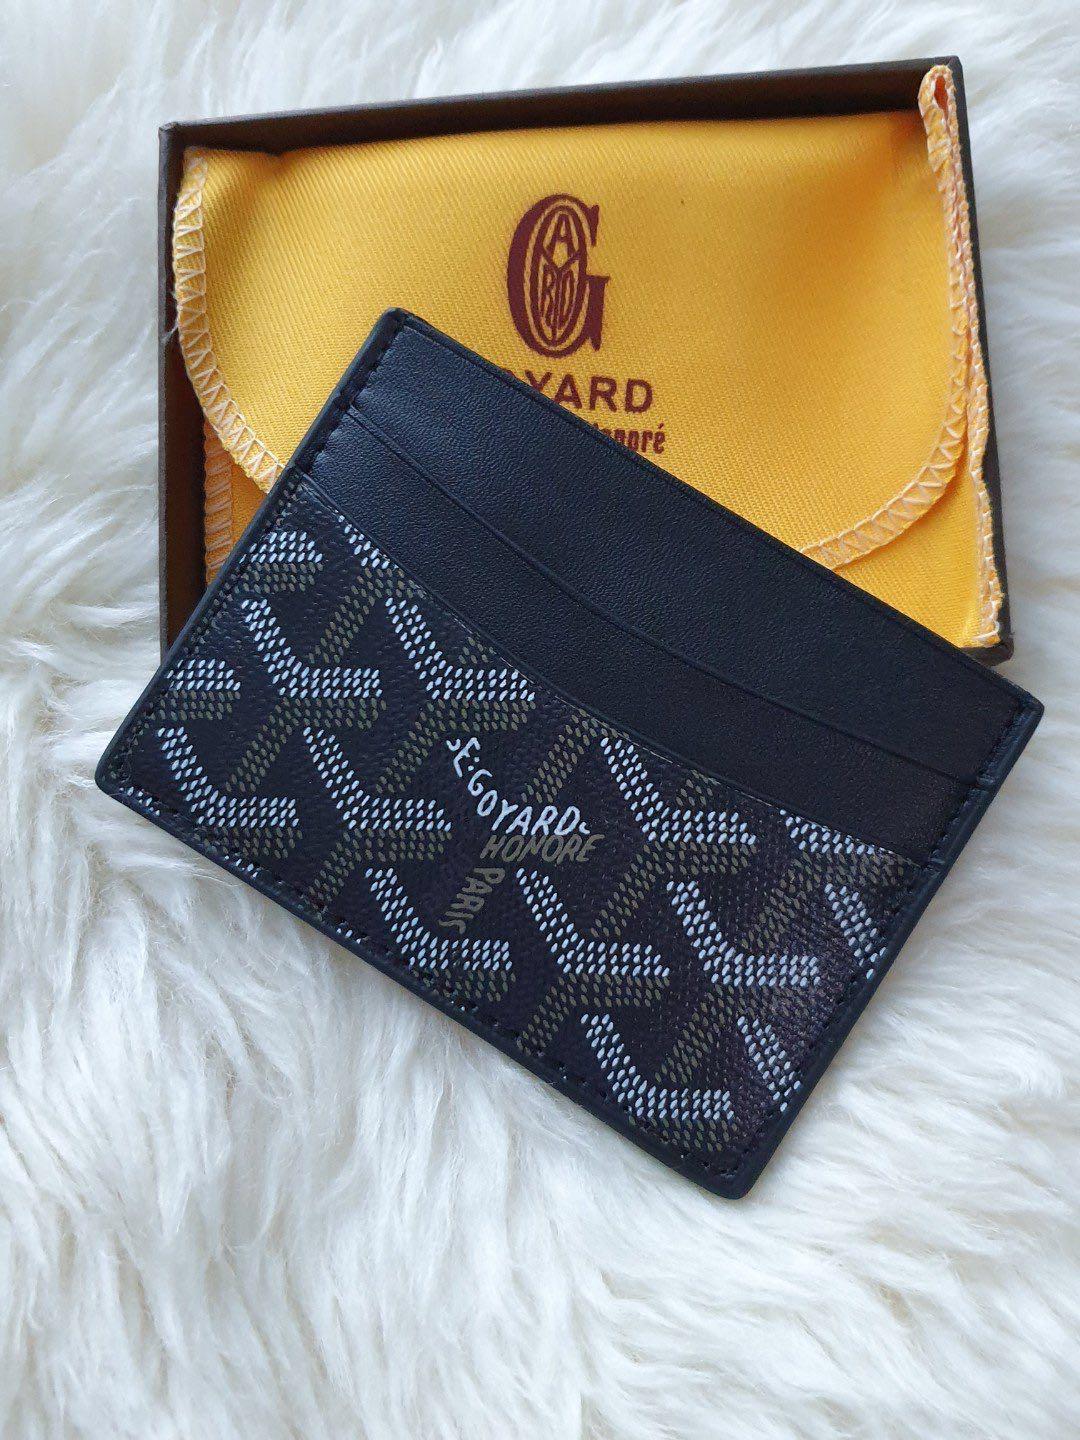 how much is a goyard mens wallet